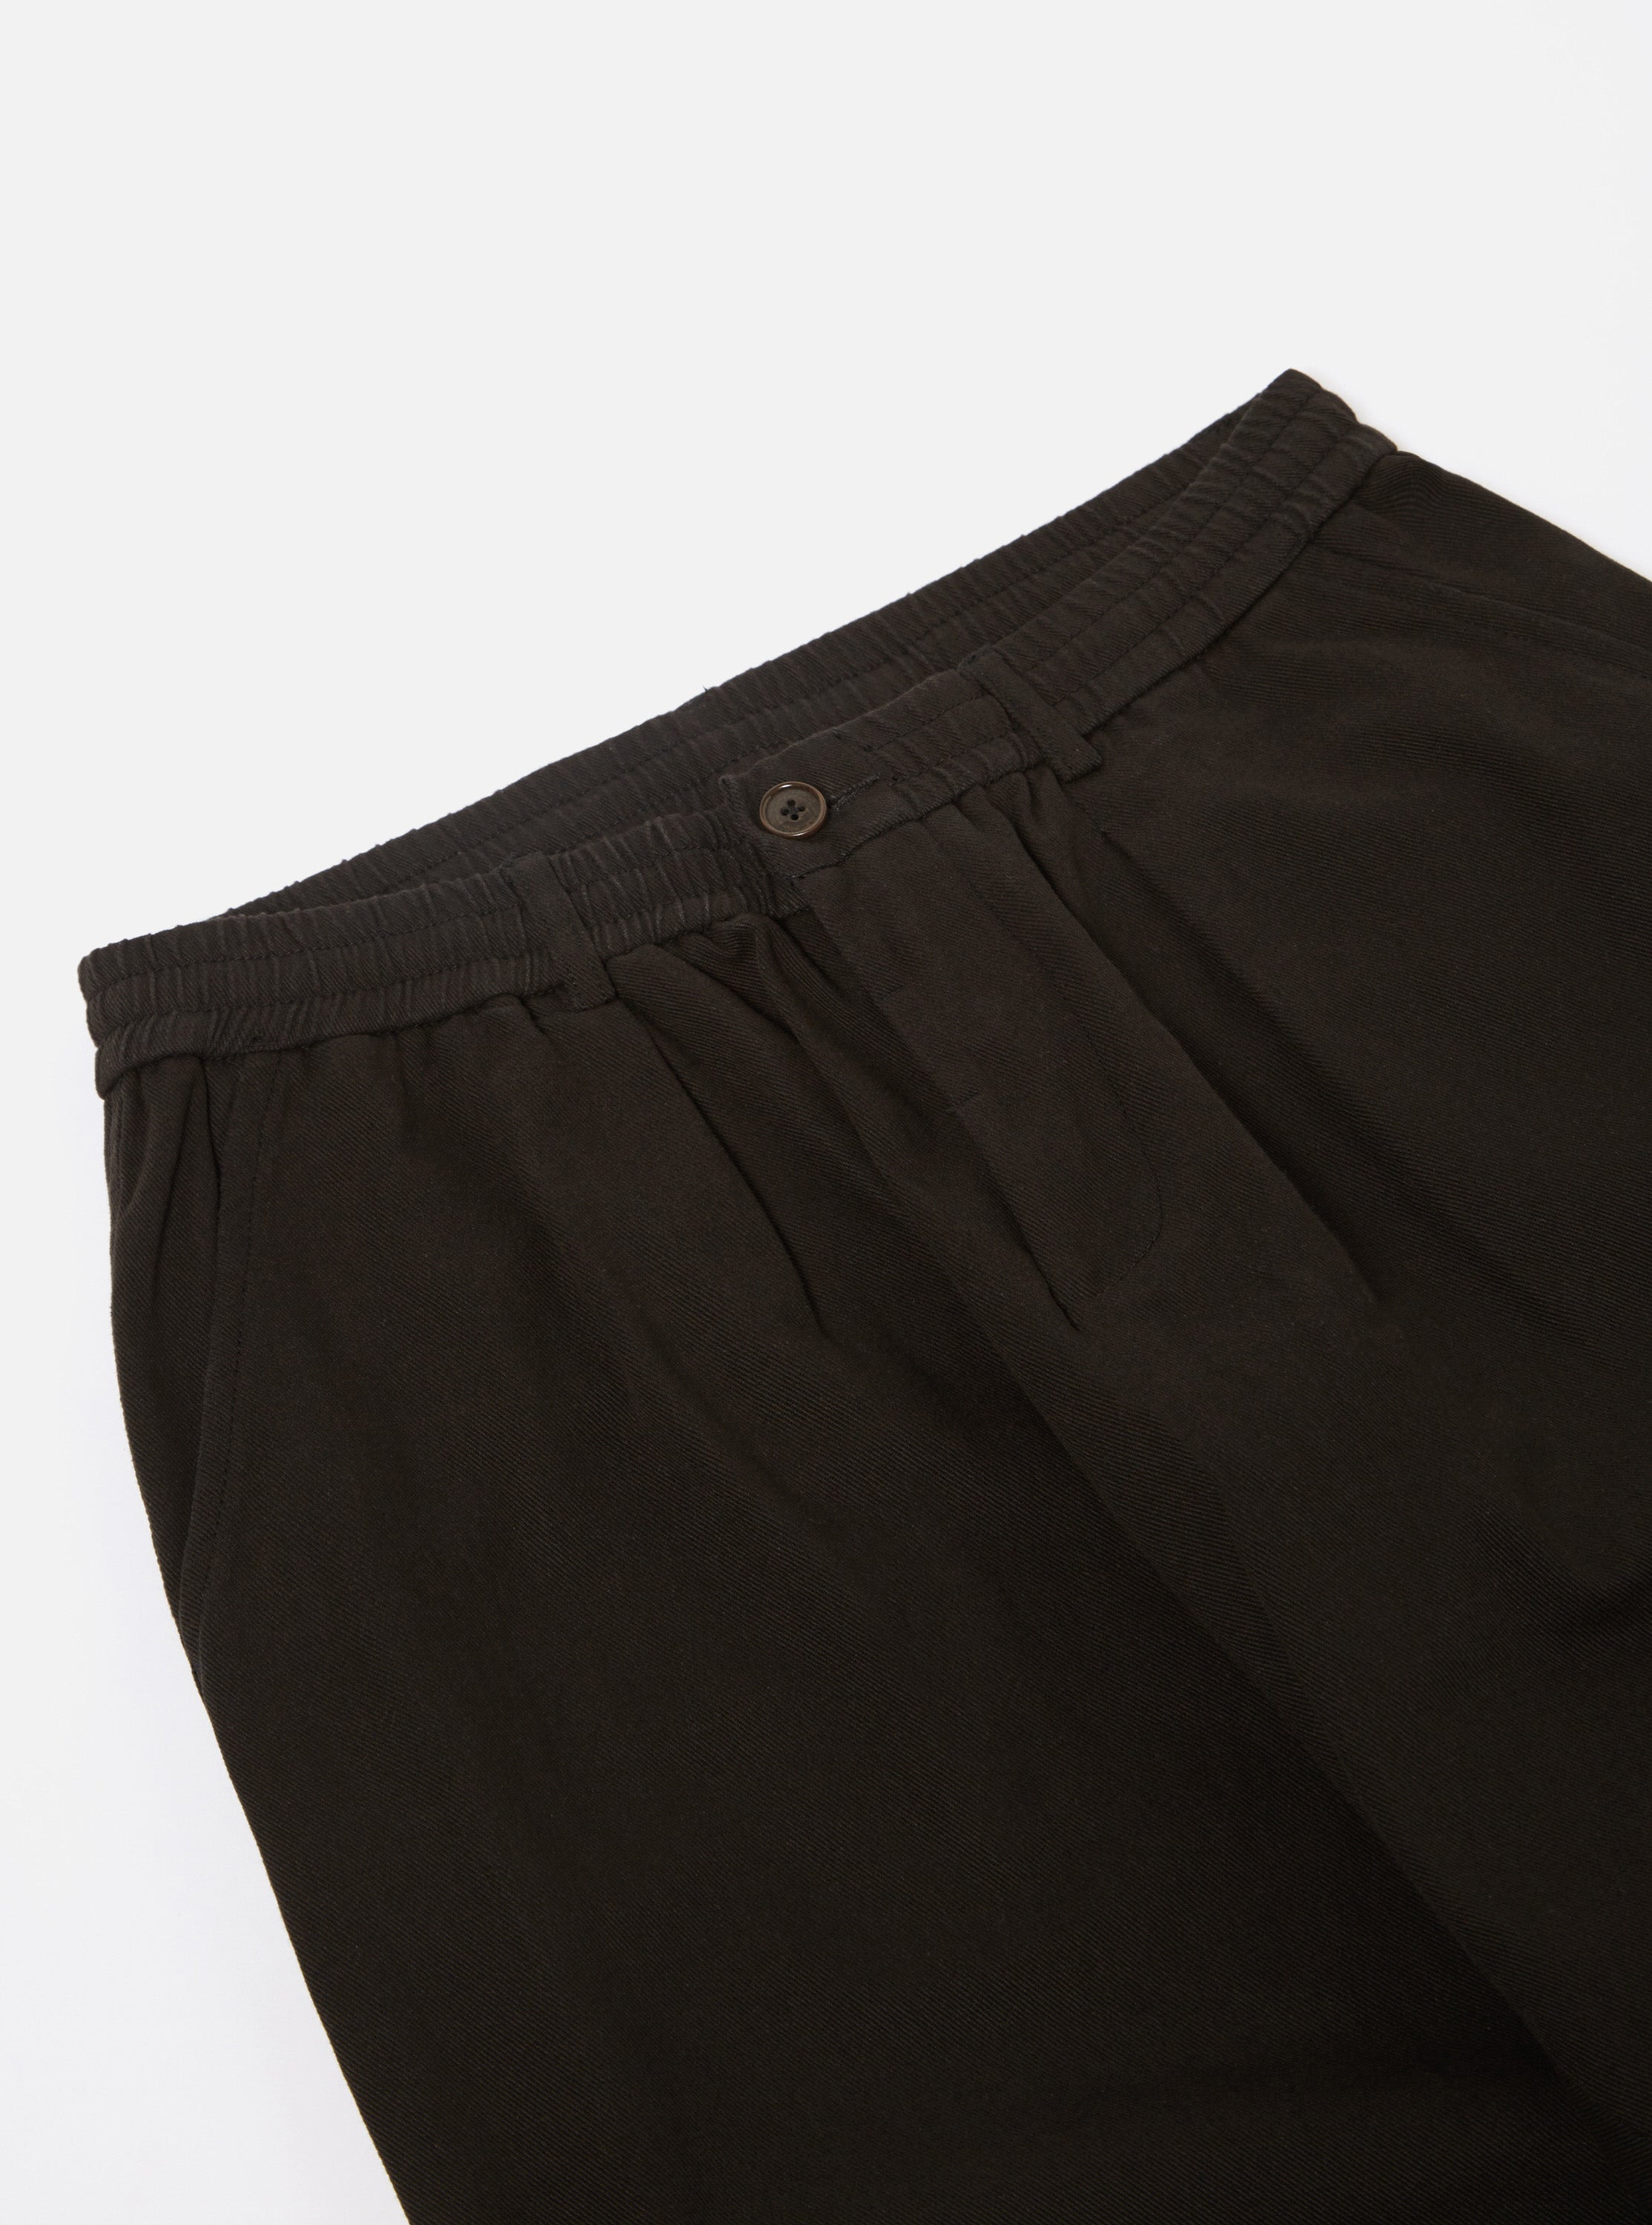 Universal Works Pleated Track Pant in Black Winter Twill